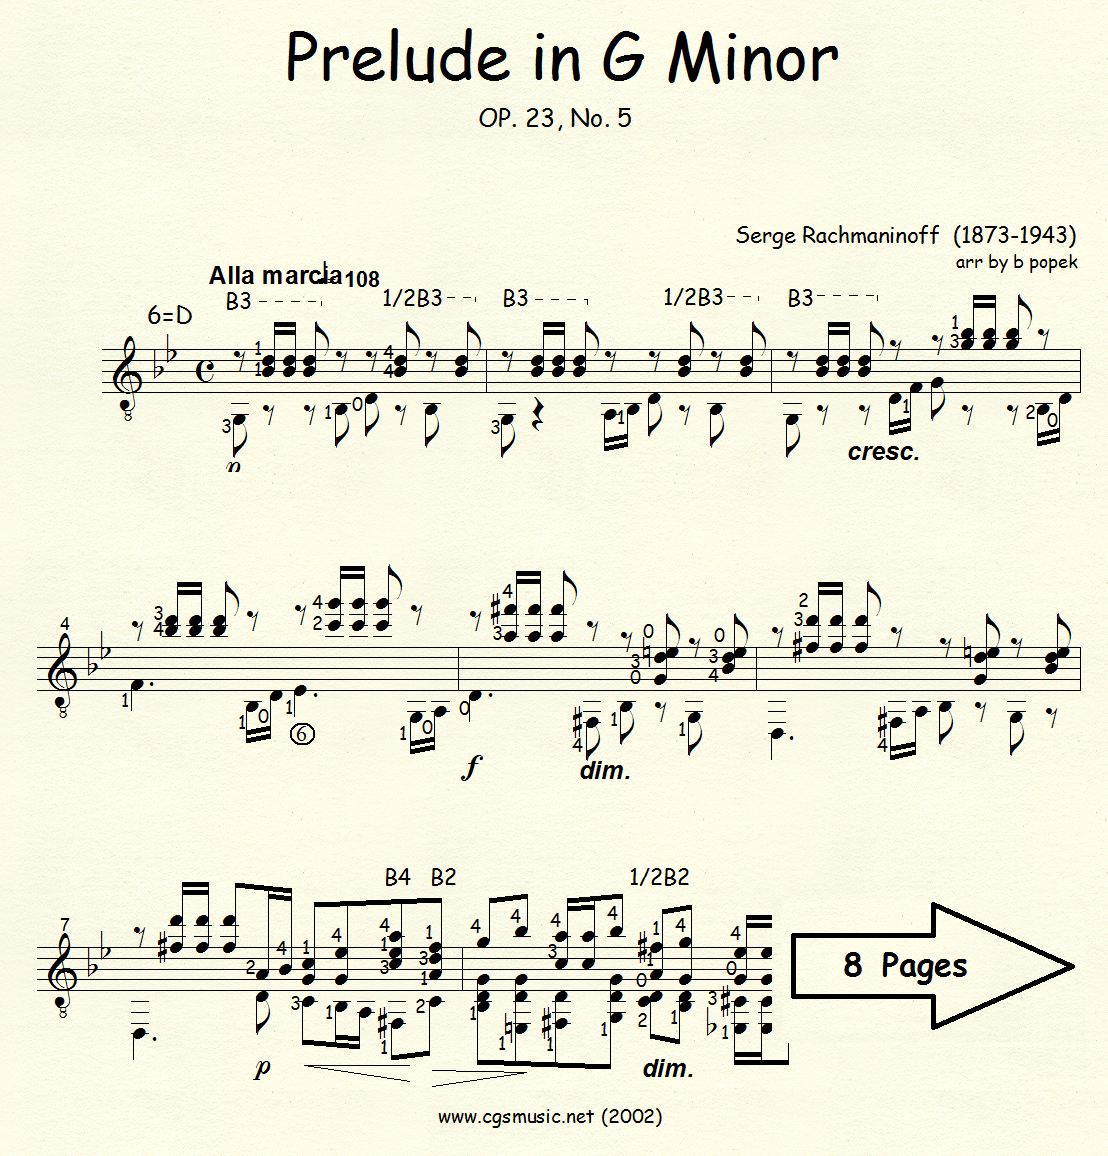 Prelude in G Minor Op 23 #5 (Rachmaninoff) for Classical Guitar in Standard Notation